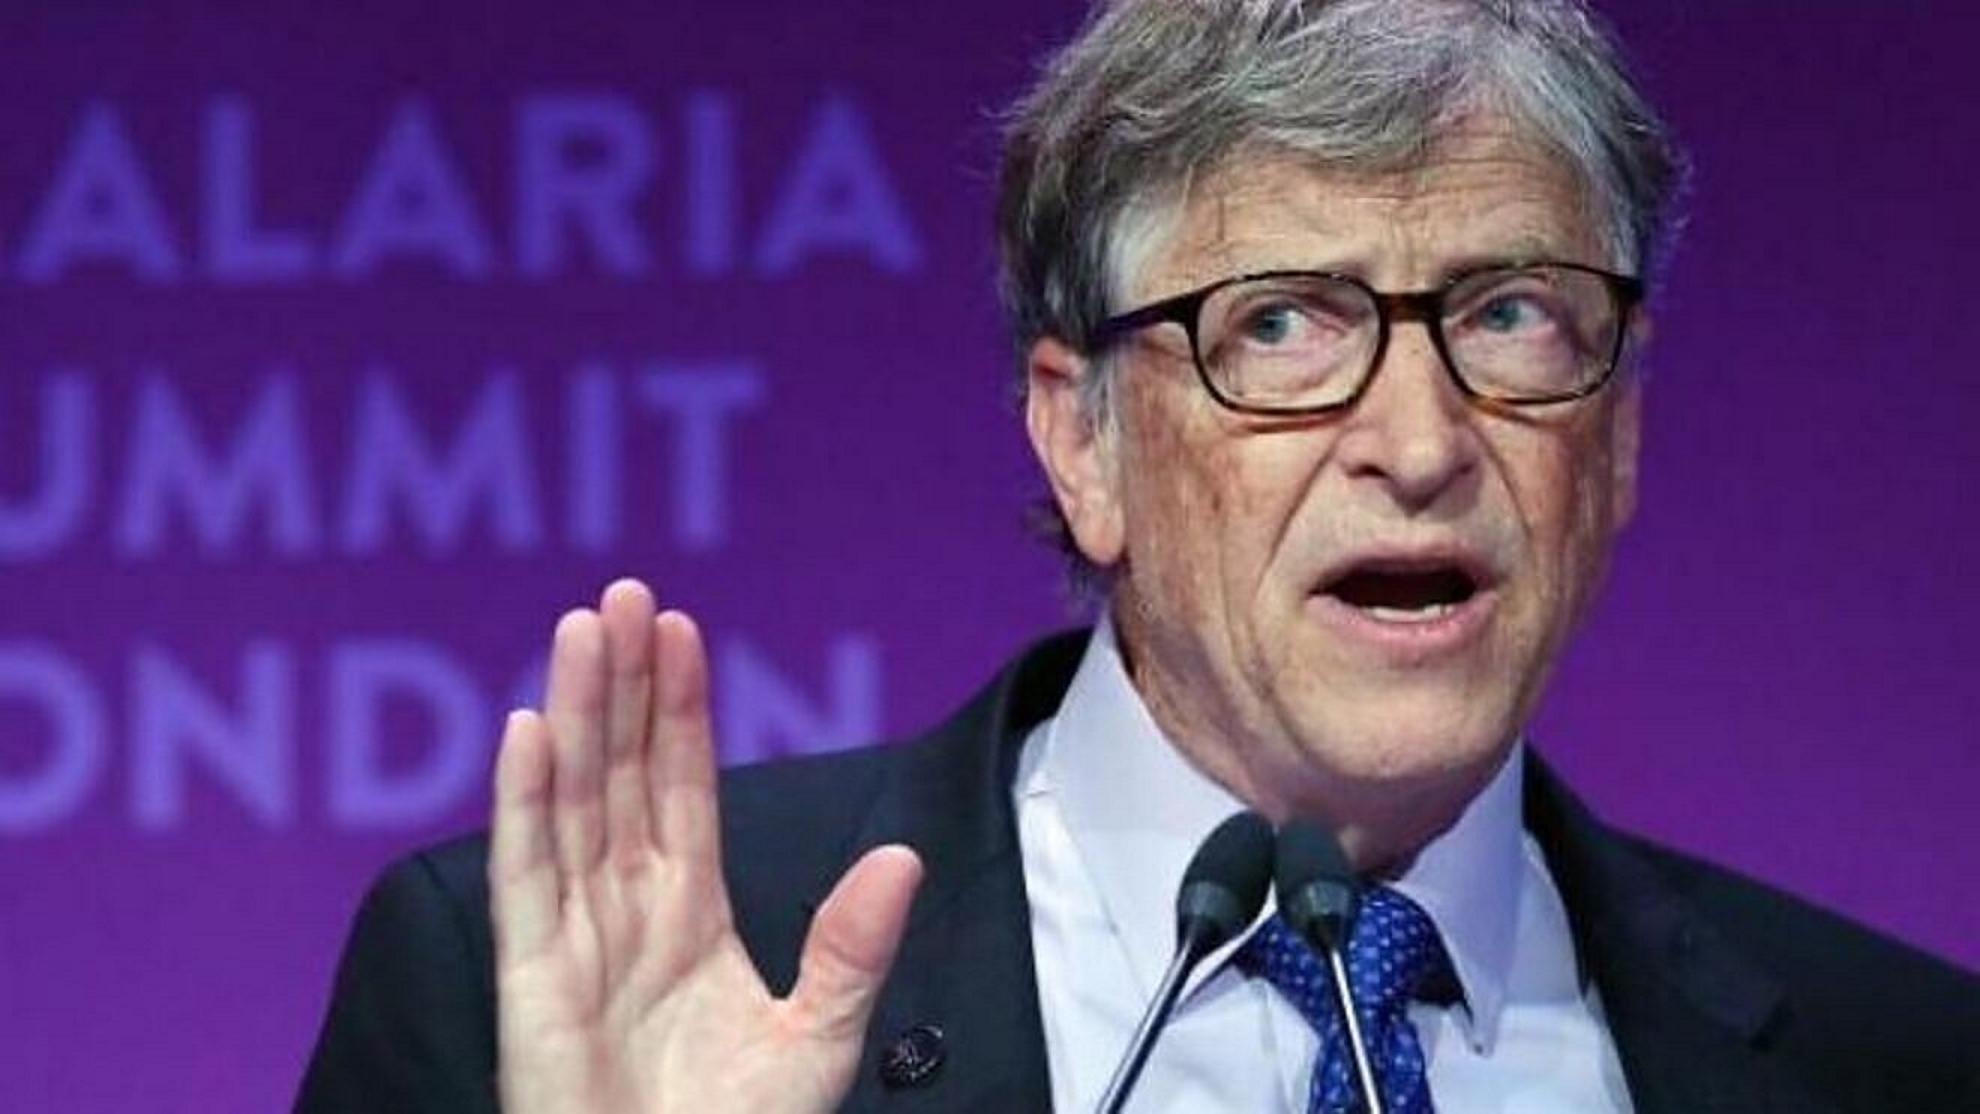 Bill Gates' warning: There is a risk of another, more transmissible and lethal variant of the coronavirus